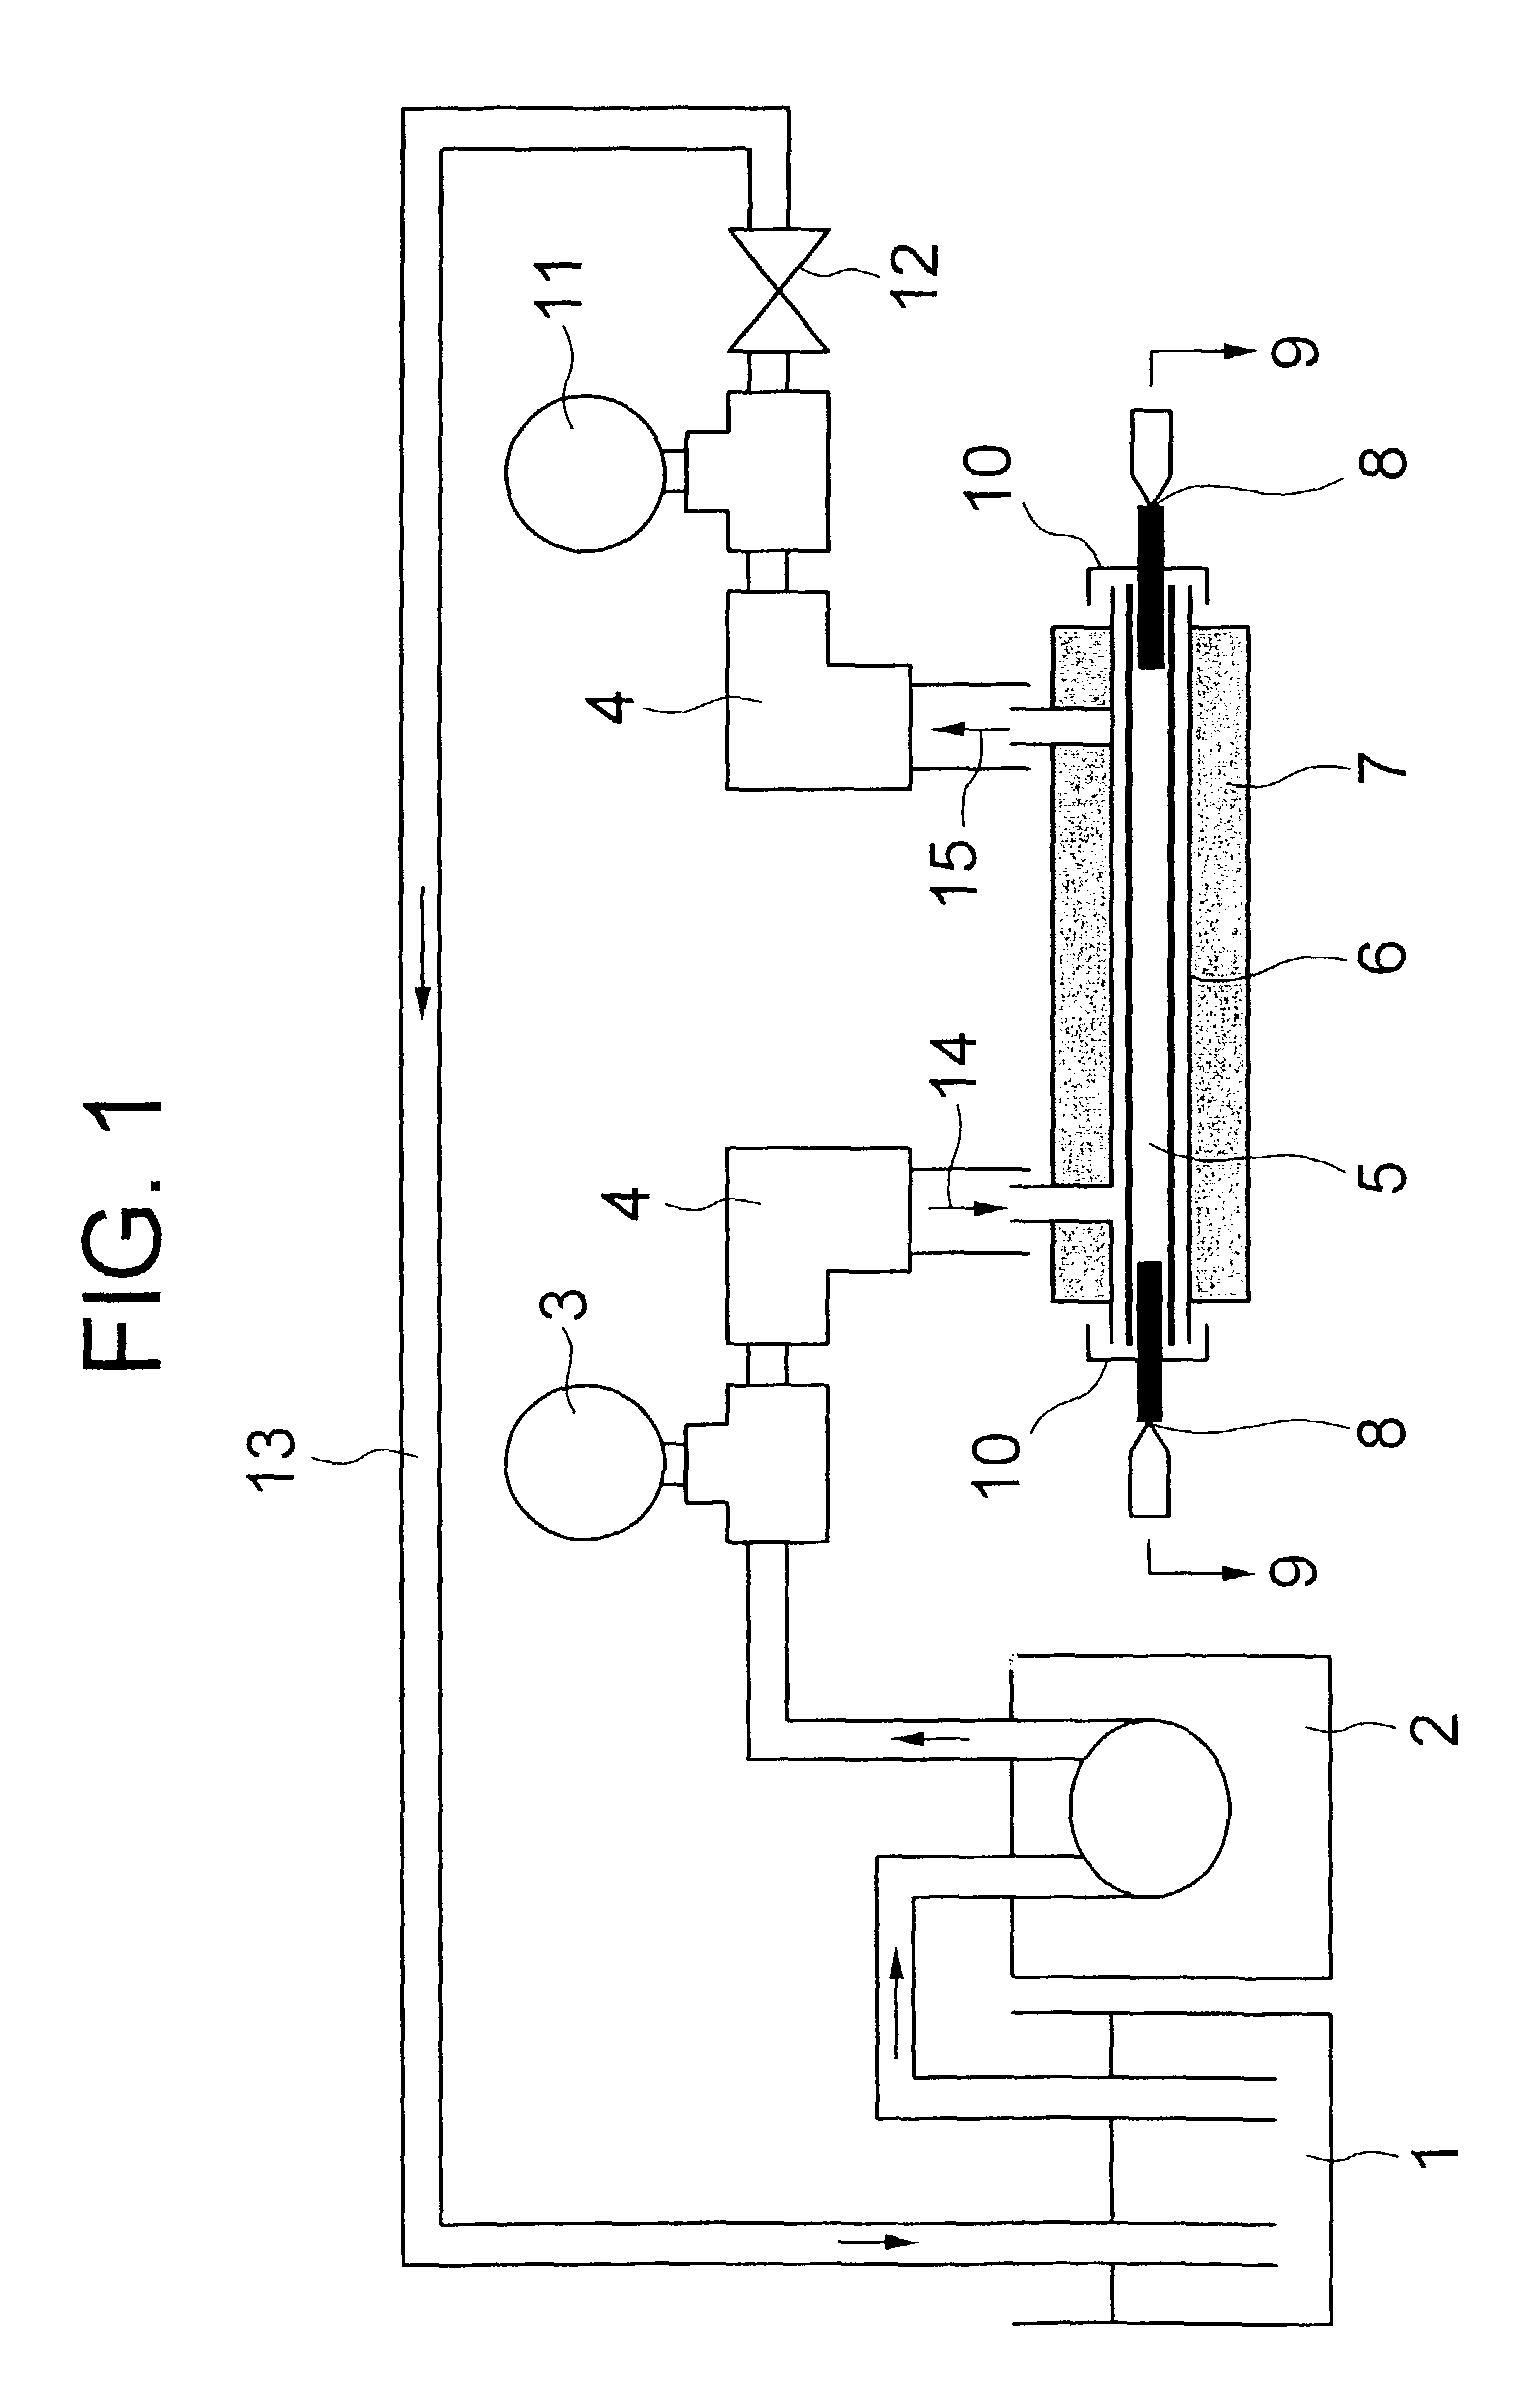 Method for purifying suspended water by membrane filtration